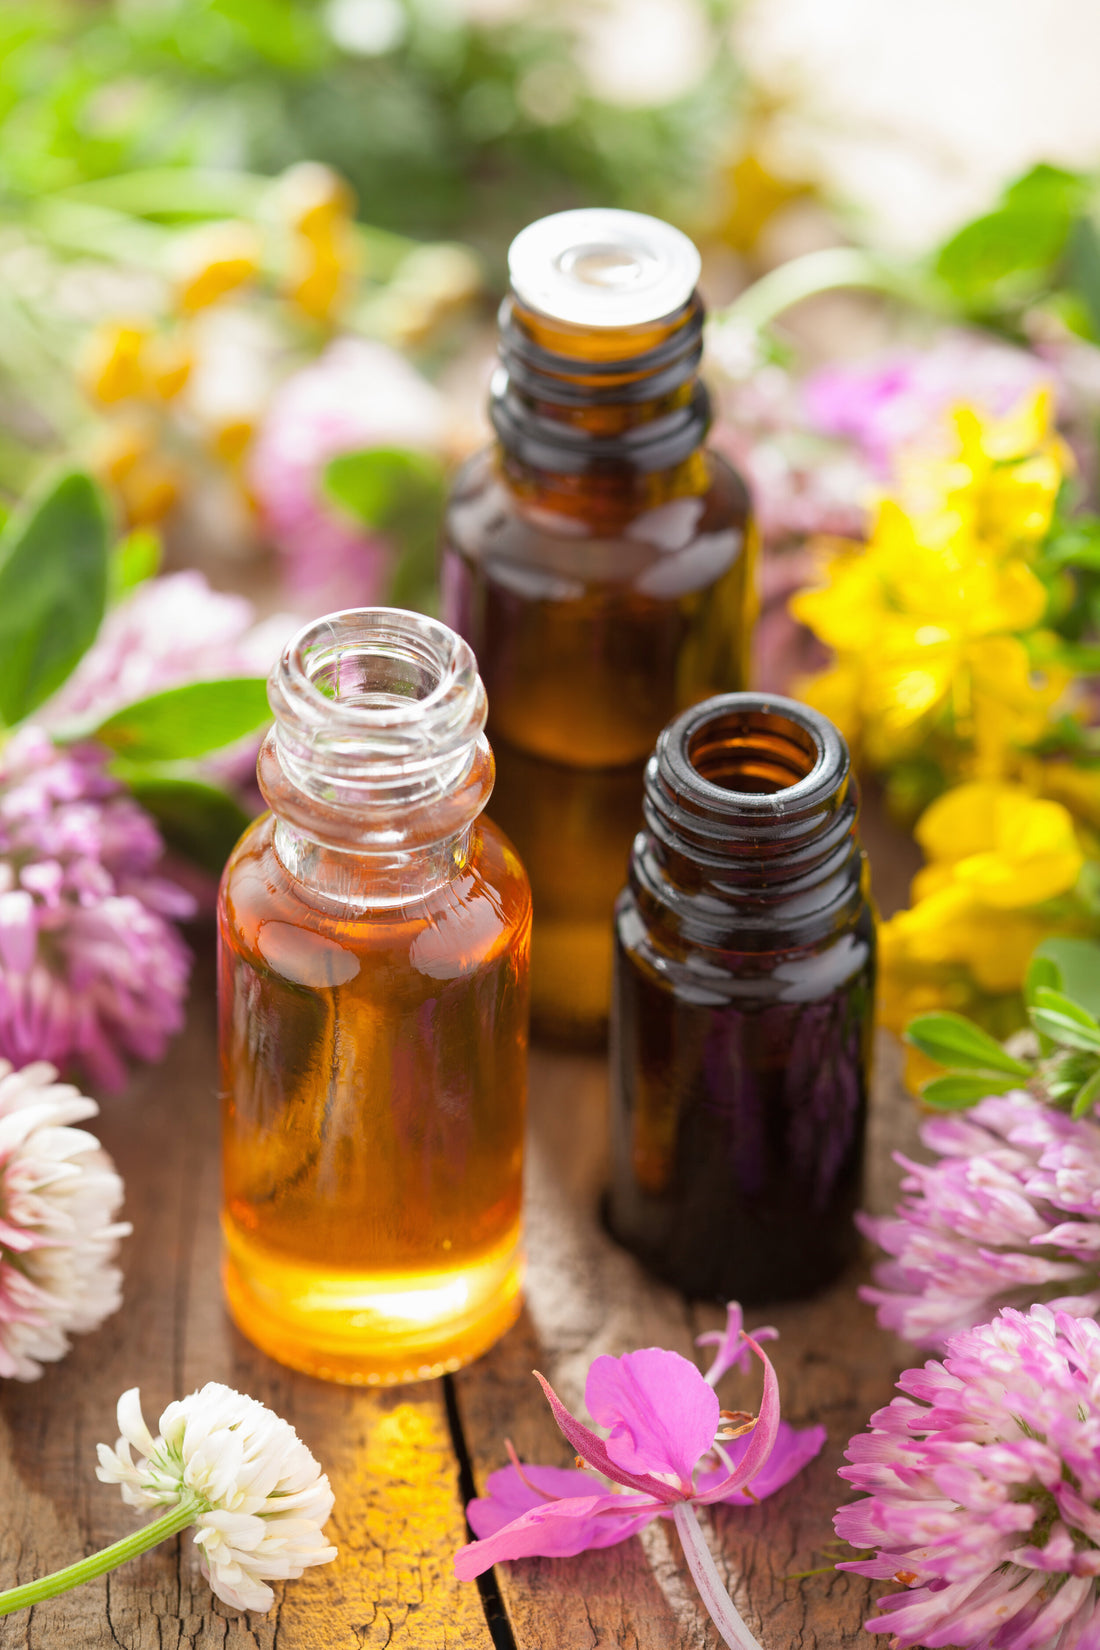 Essential Oil "Grades" and How to Buy Essential Oils